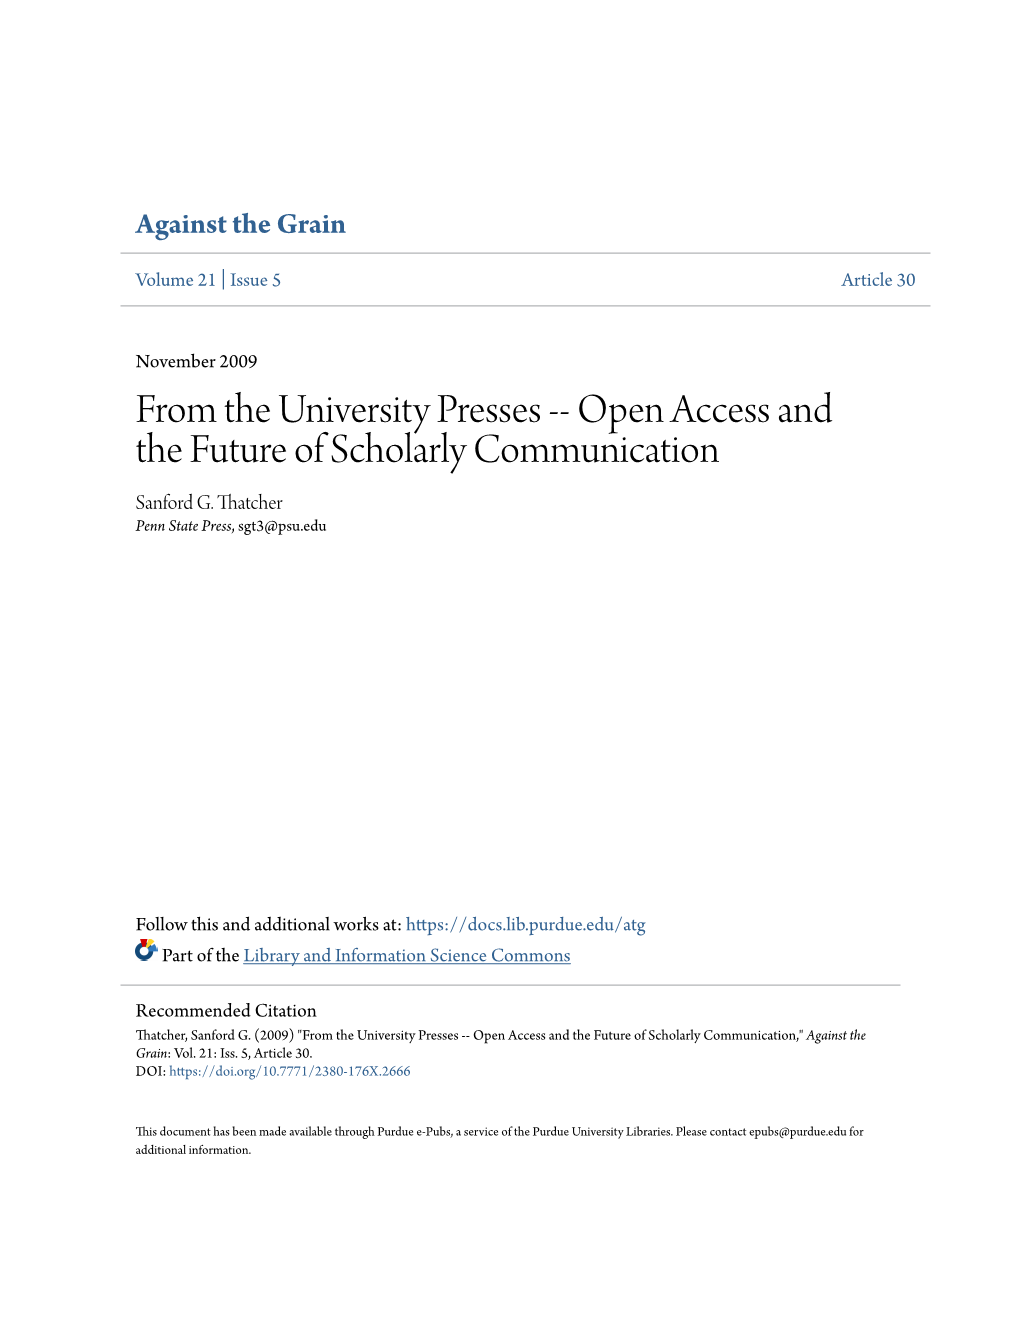 From the University Presses -- Open Access and the Future of Scholarly Communication Sanford G